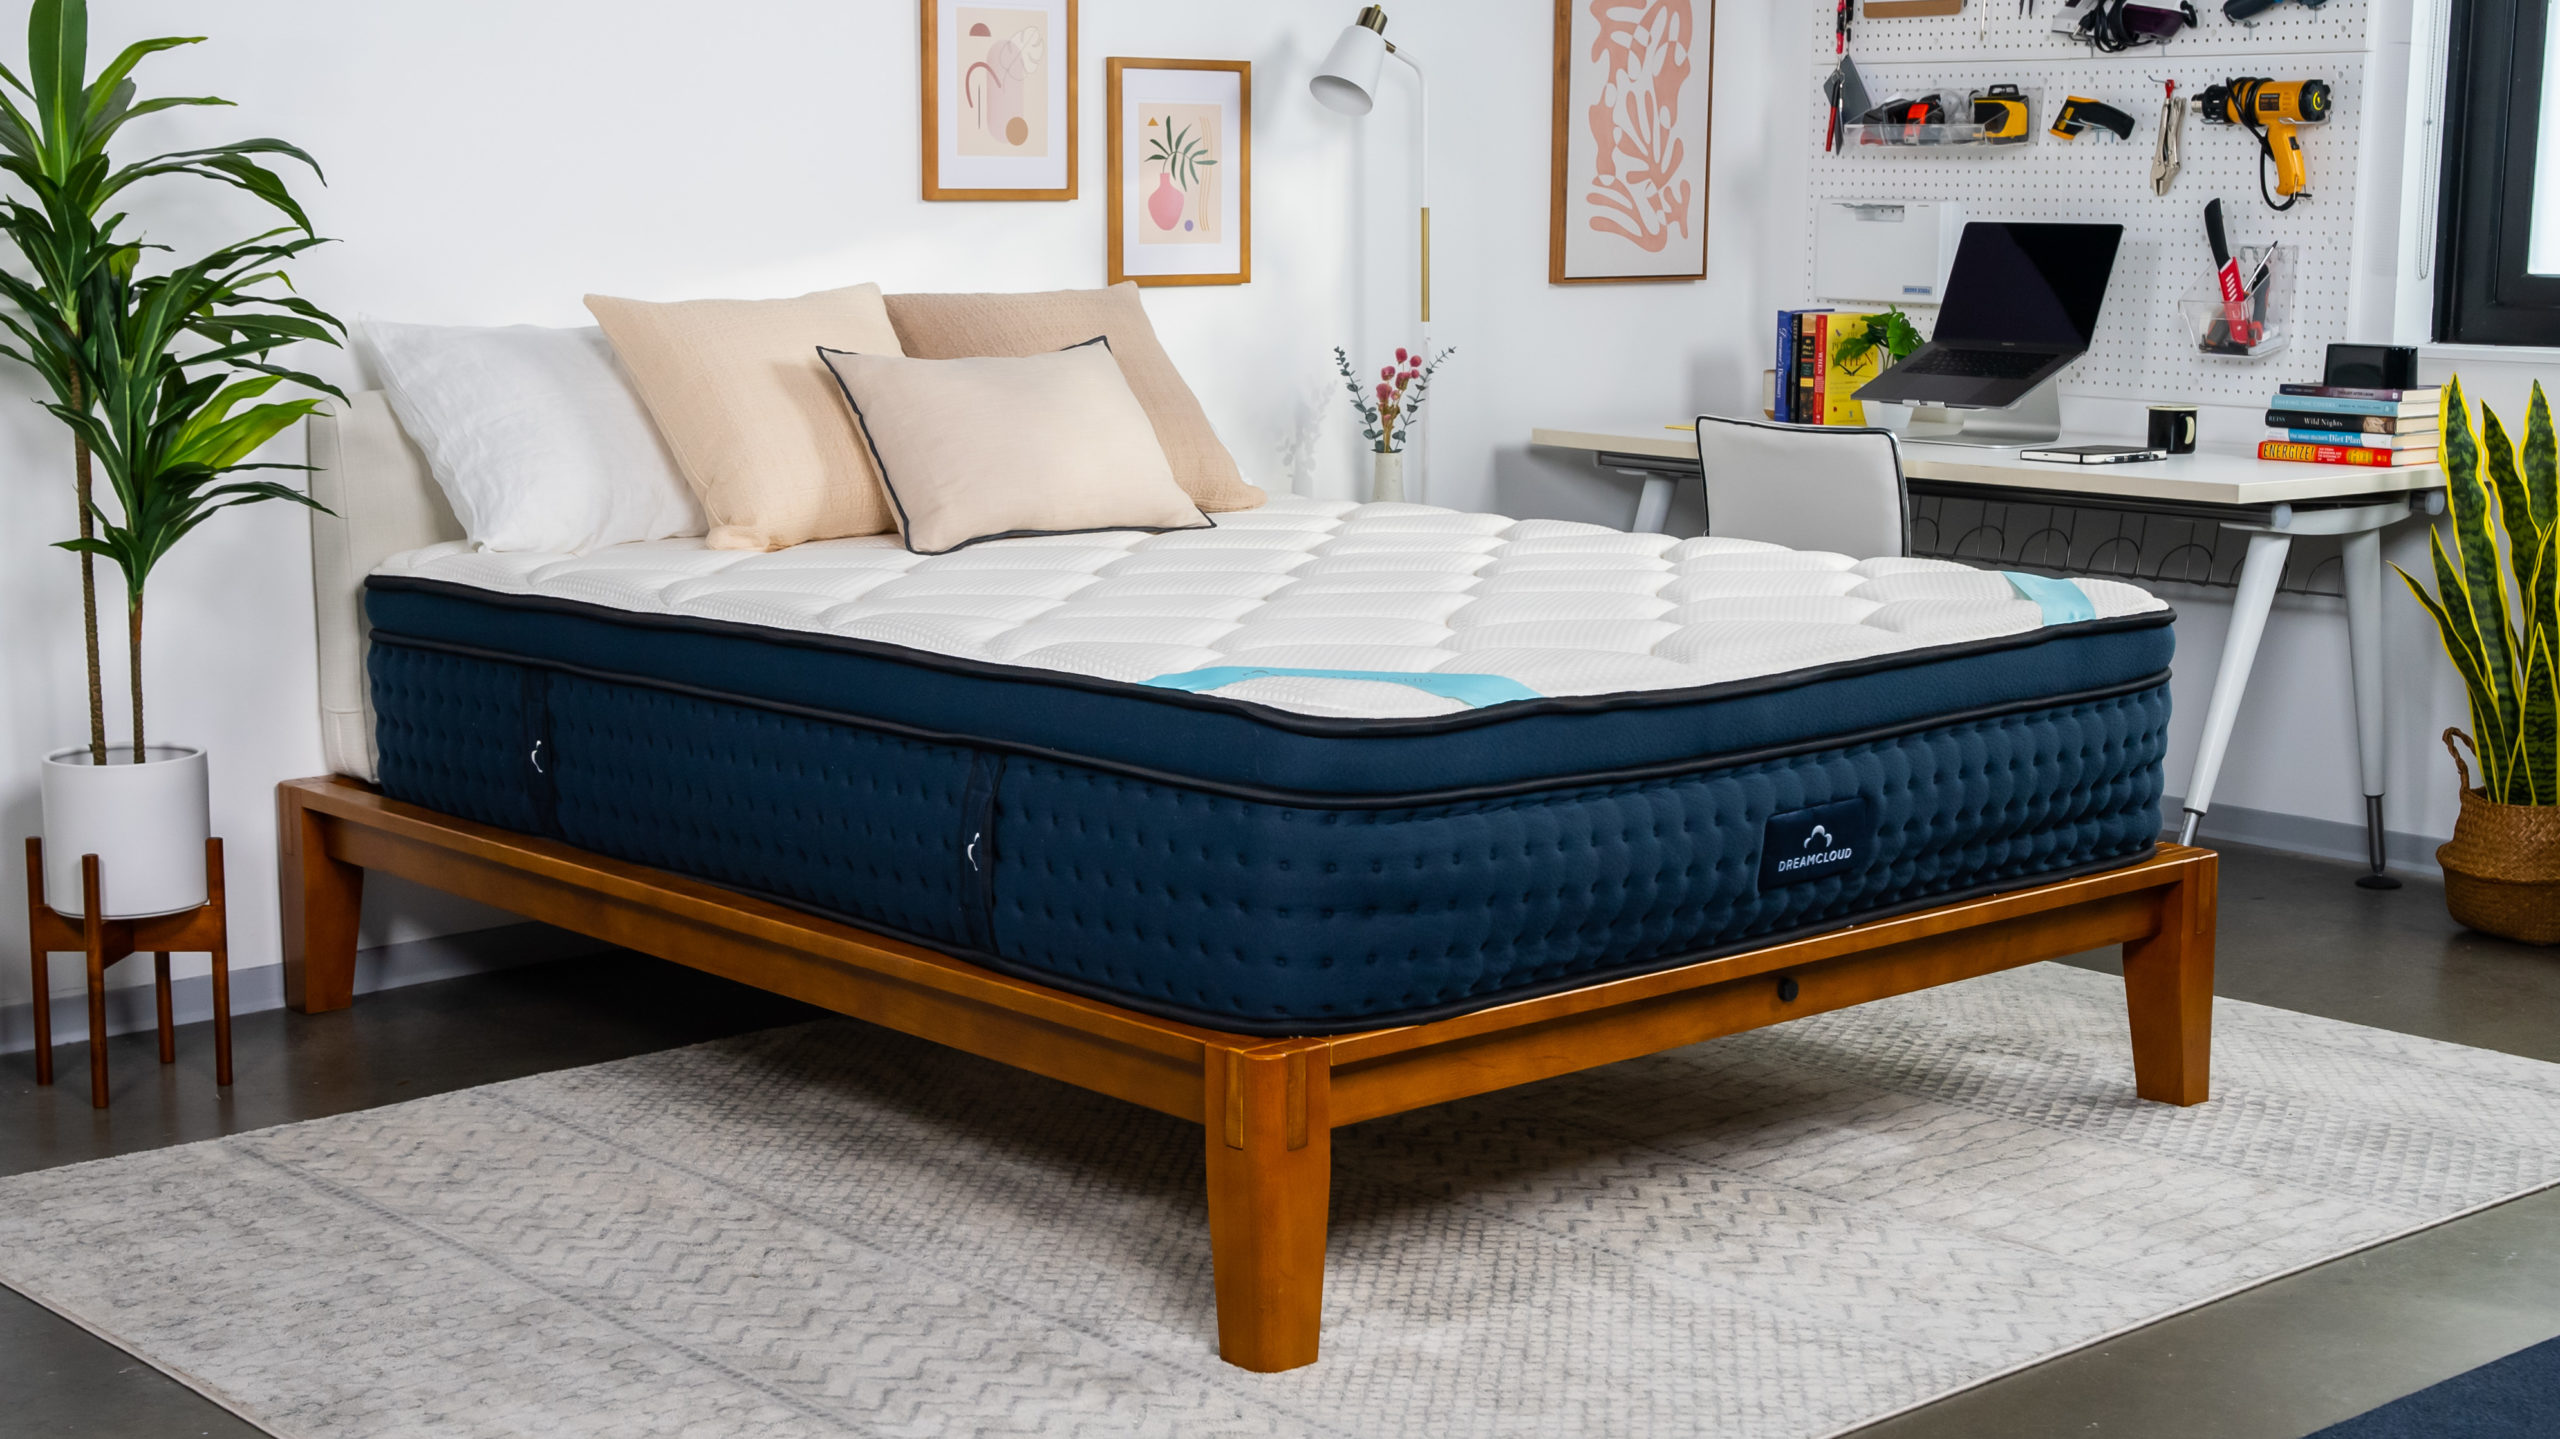 Types Of Spring Air Mattresses